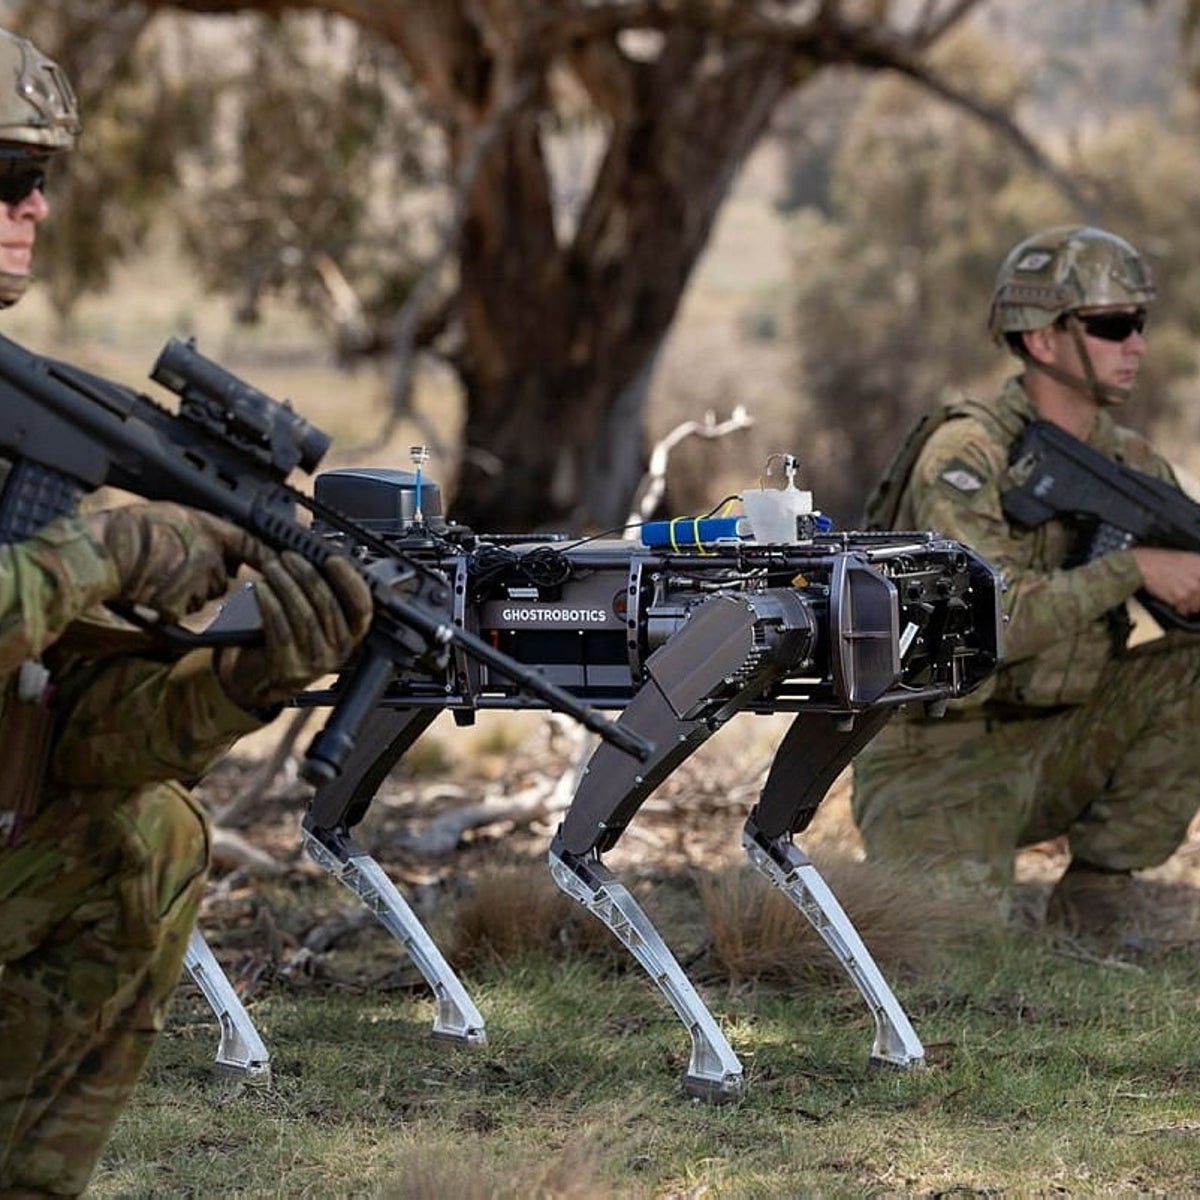 Military robot dogs seen with assault rifles attached their backs | The Independent